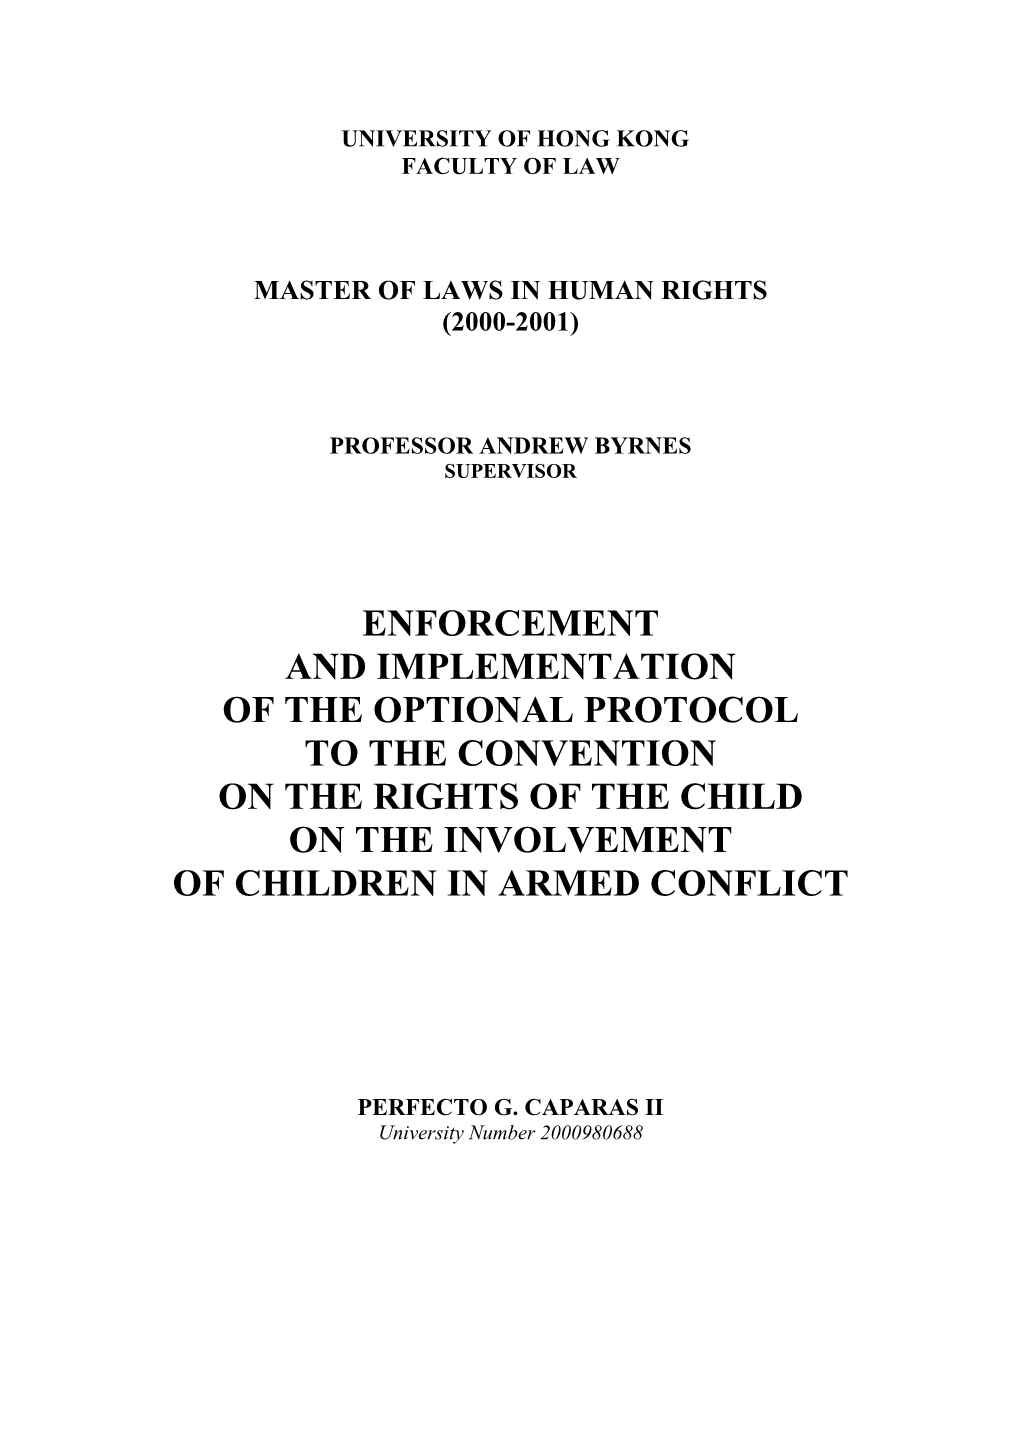 Enforcement and Implementation of the Optional Protocol to the Convention on the Rights of the Child on the Involvement of Children in Armed Conflict